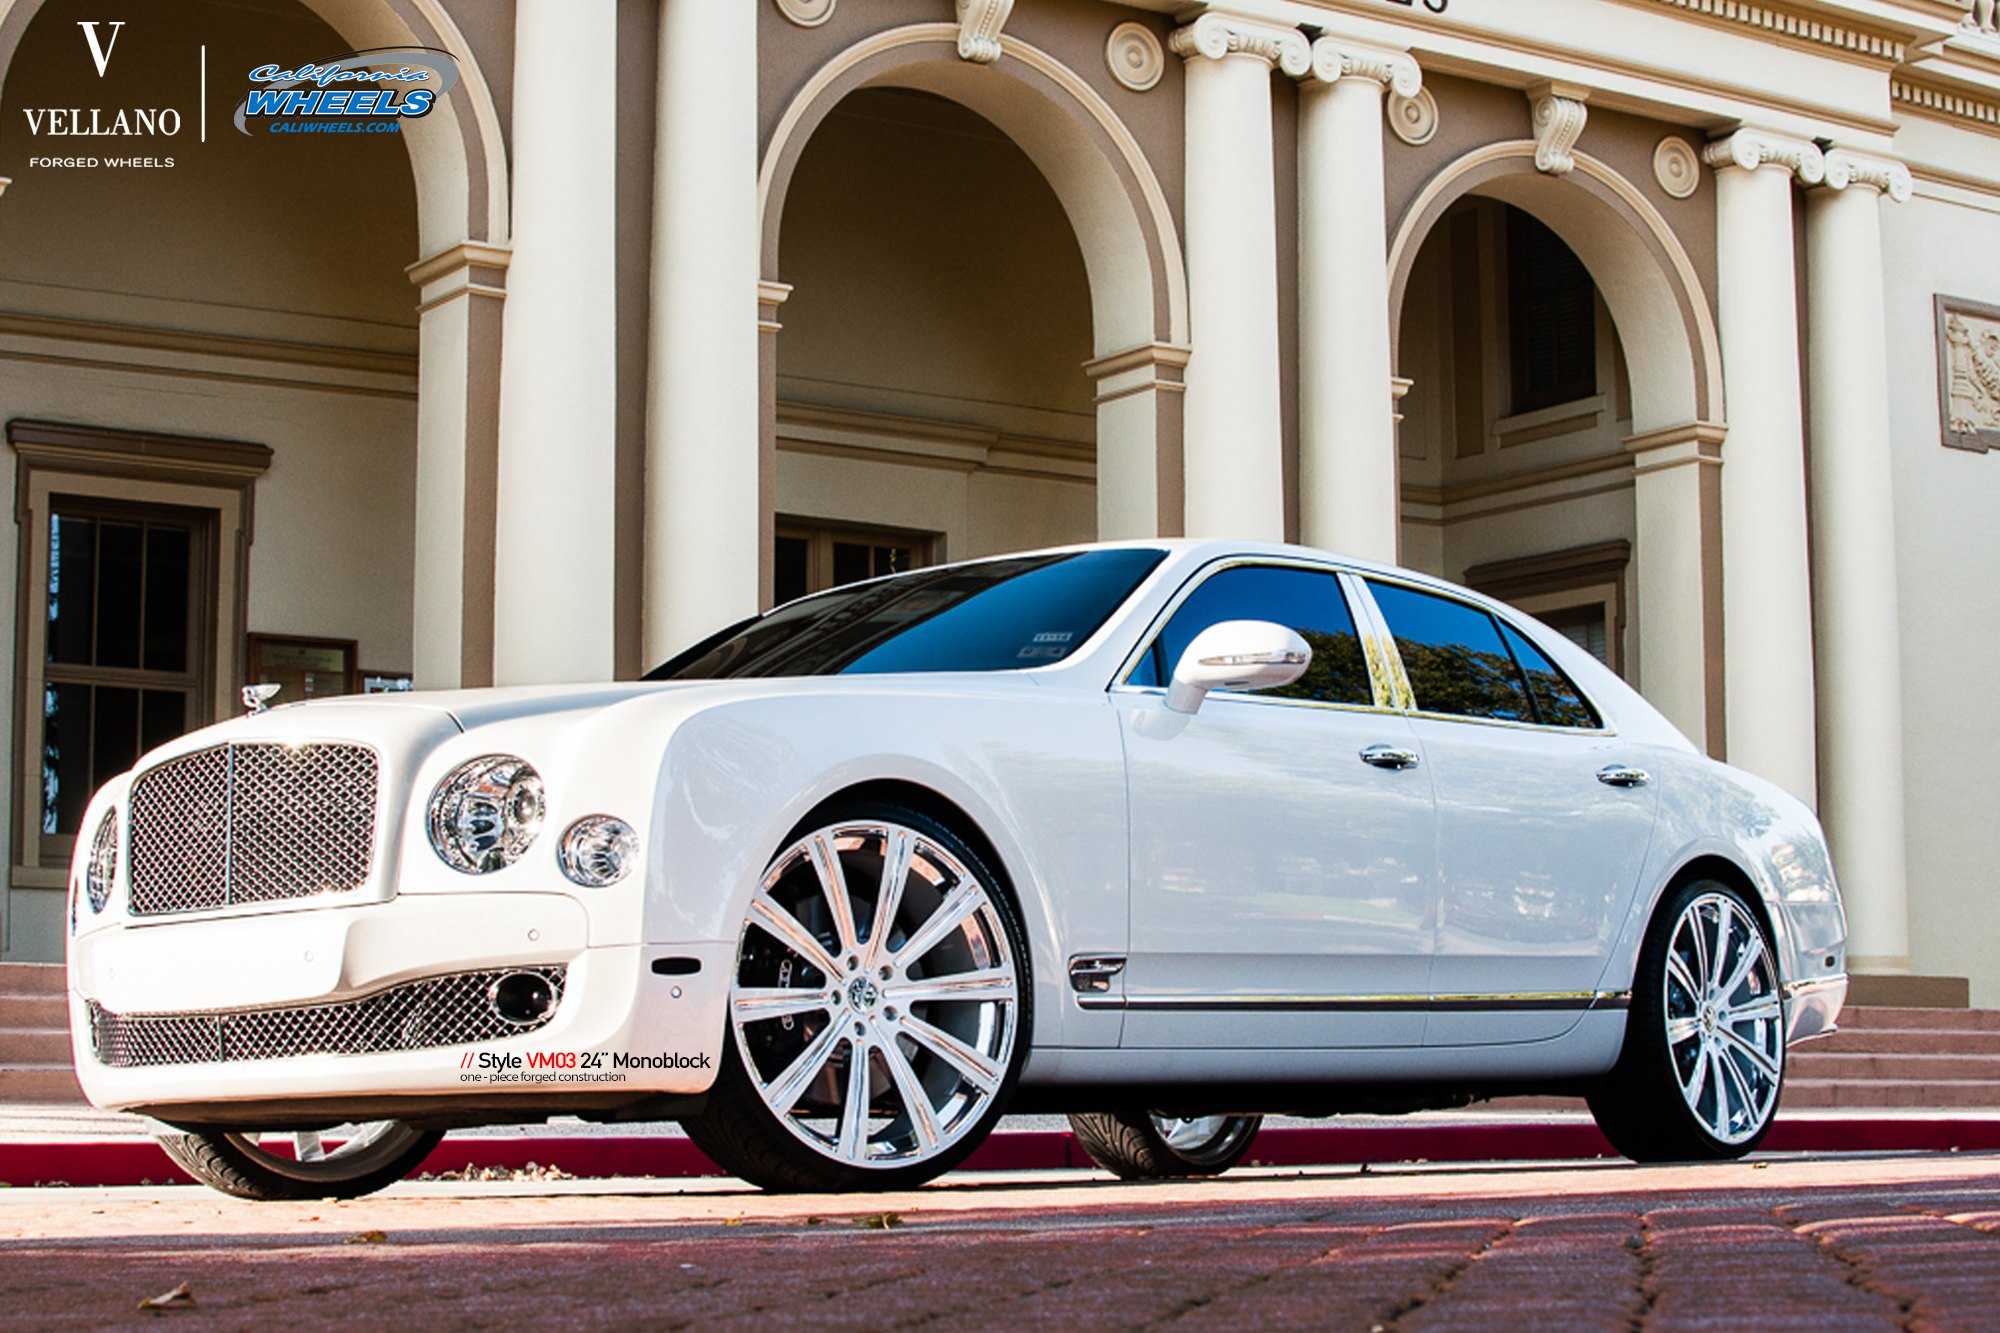 Aftermarket Headlights on White Bently Mulsanne - Photo by Vellano